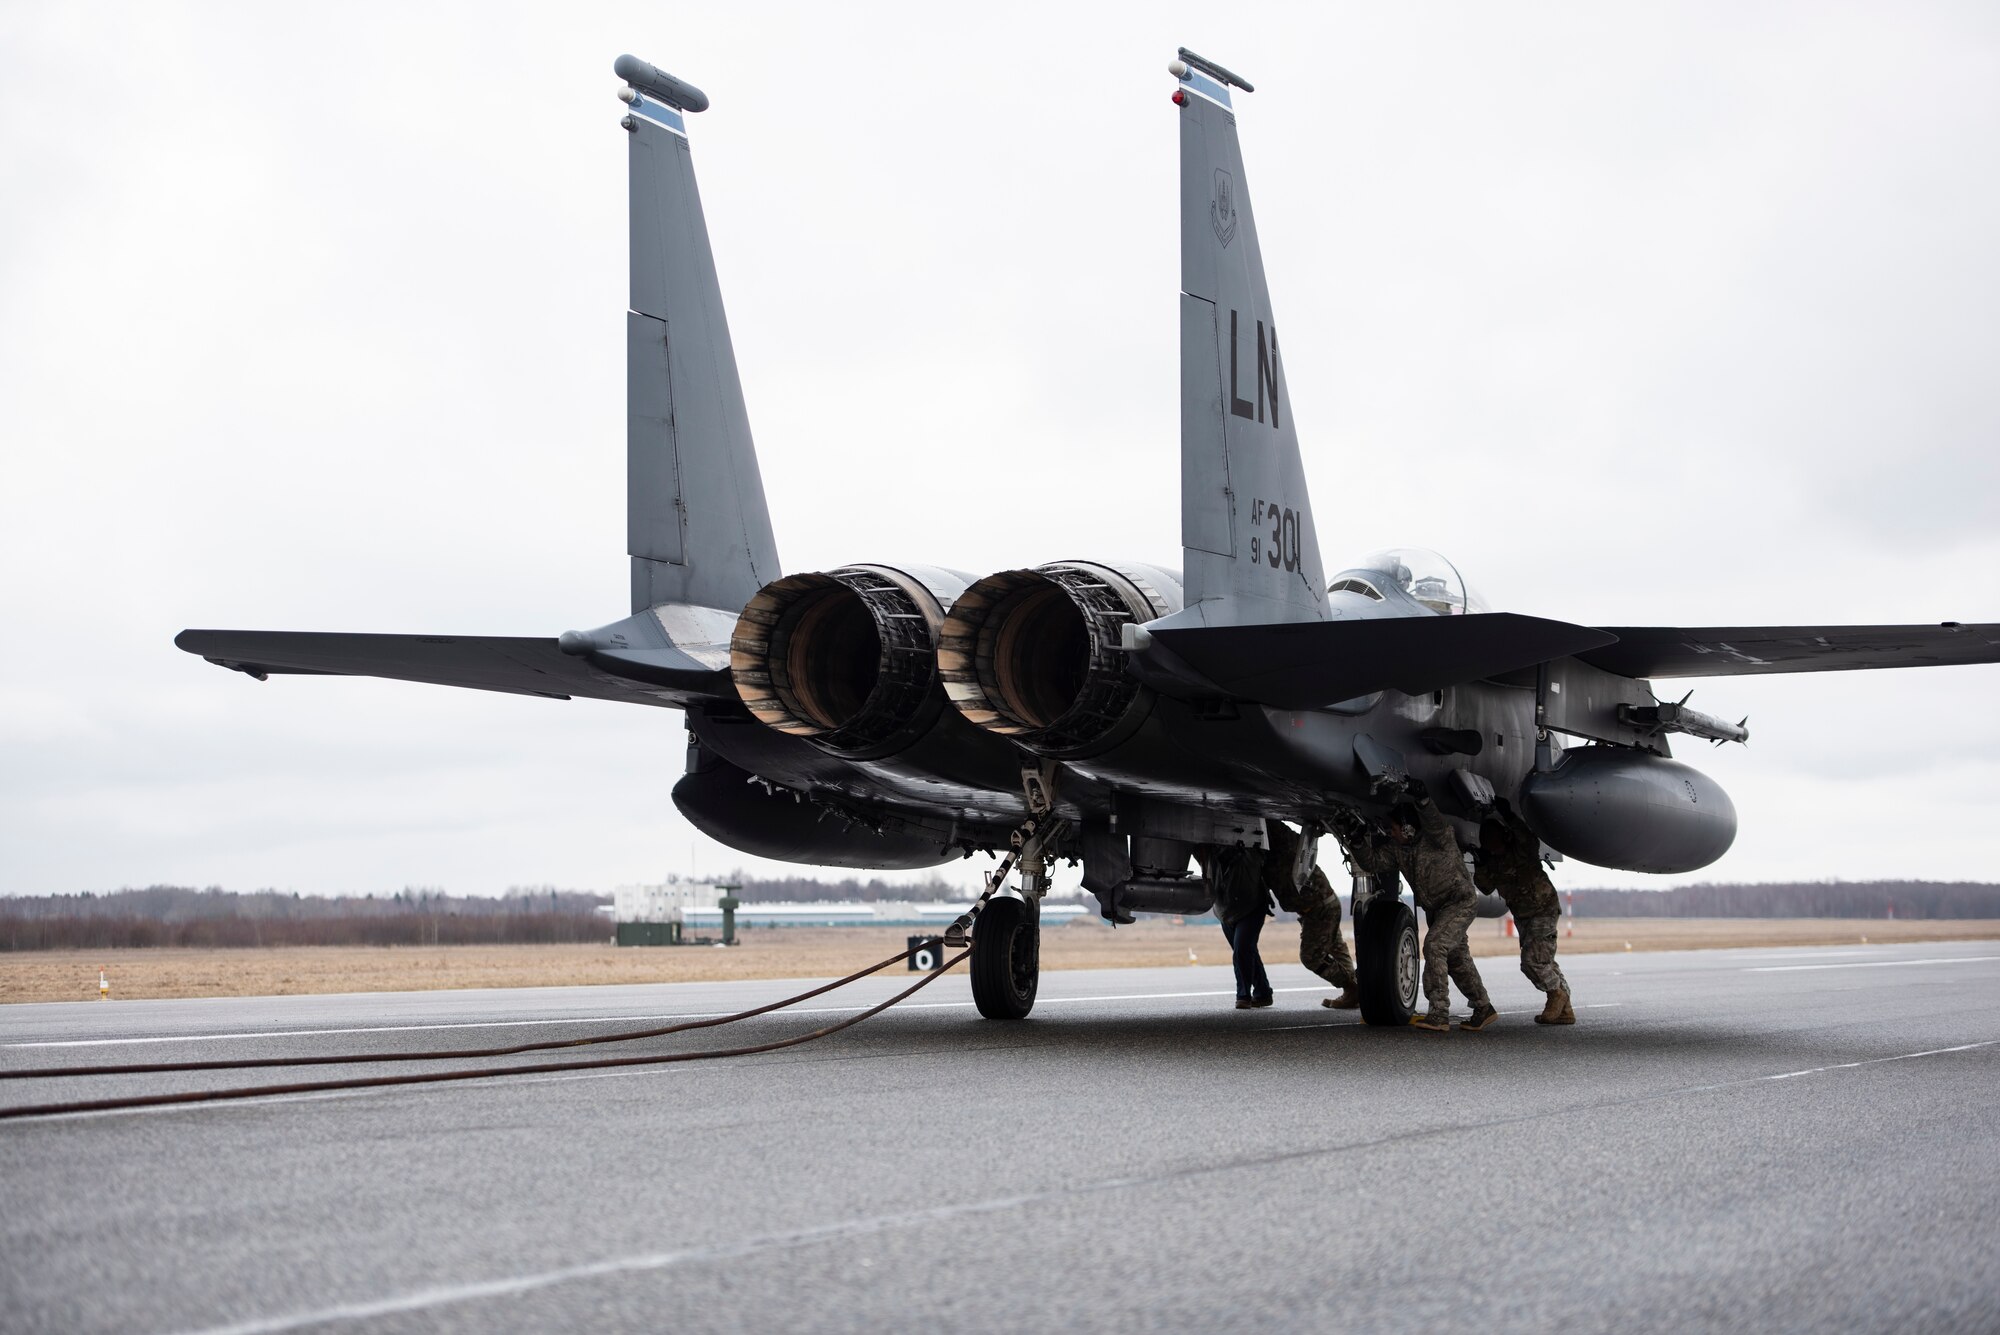 Airmen assigned to the 48th Aircraft Maintenance Squadron work to release the cable from the tailhook of a 492nd Fighter Squadron F-15E Strike Eagle during a Barrier Arresting Kit certification at Ämari Air Base, Estonia, March 17, 2021. The BAK is certified annually to test the stability and effectiveness of the system, which acts as a braking mechanism to stop the aircraft in the event of an emergency that would prevent the aircraft from performing a standard landing. (U.S. Air Force photo by Airman 1st Class Jessi Monte)